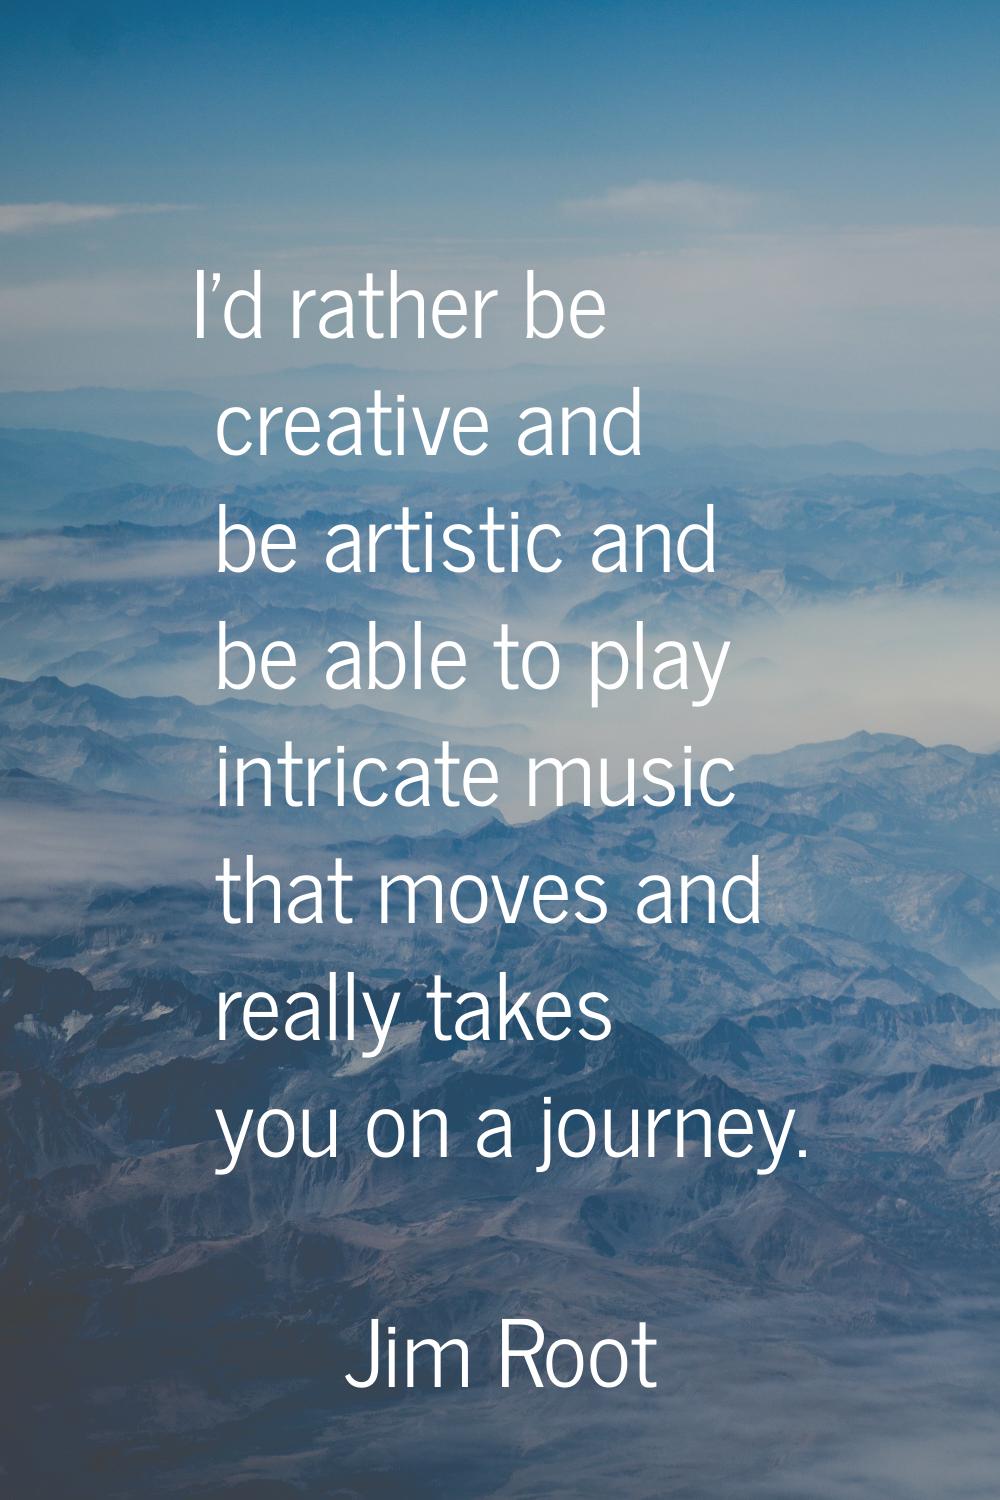 I'd rather be creative and be artistic and be able to play intricate music that moves and really ta